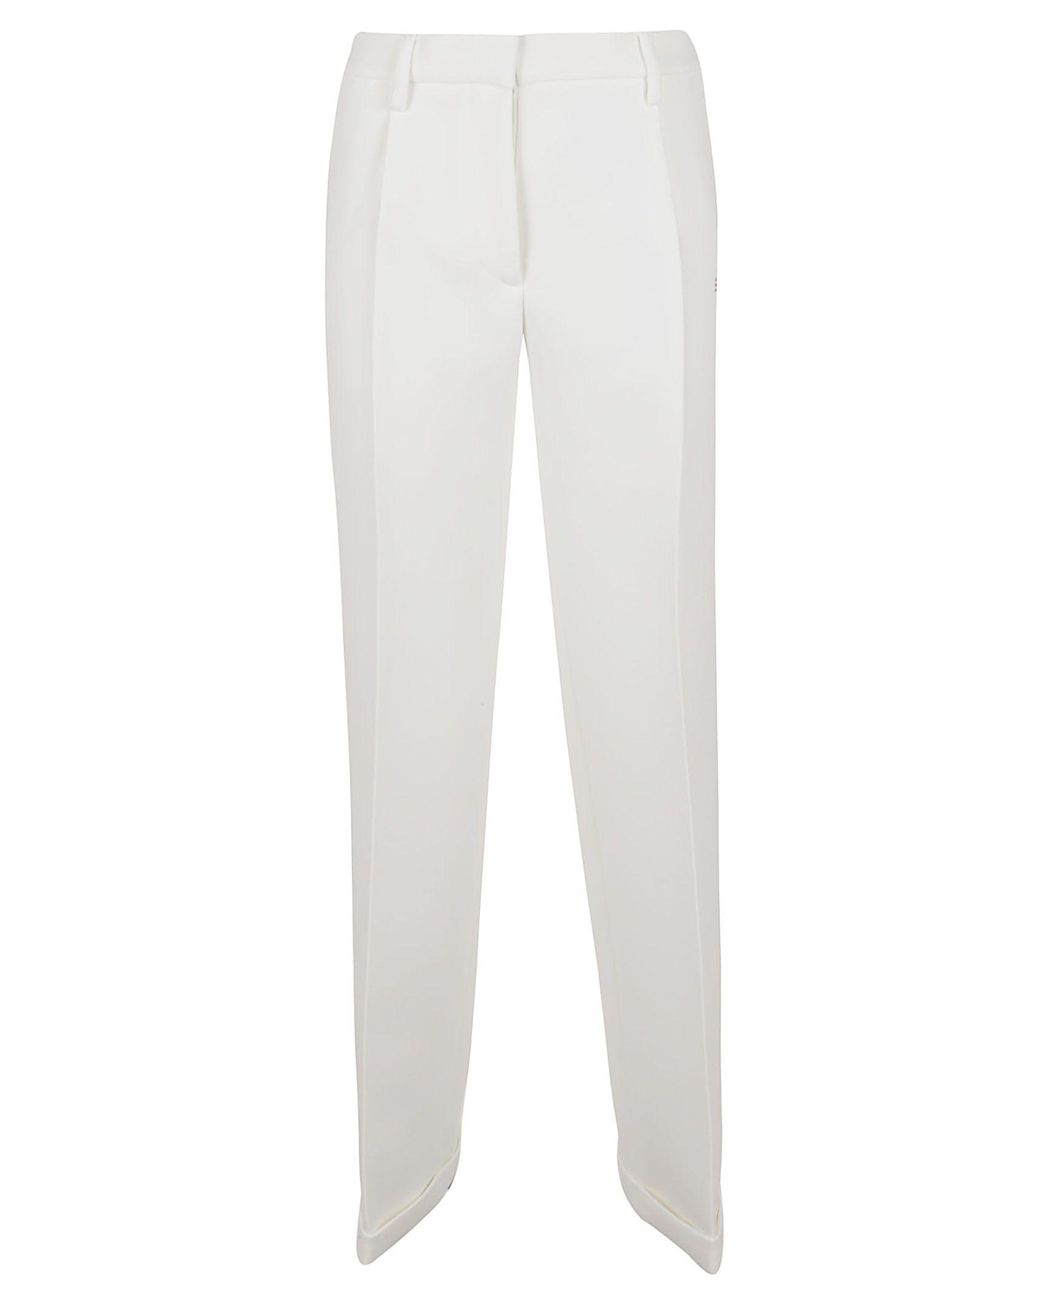 Off-White c/o Virgil Abloh Cotton Pants in White - Lyst